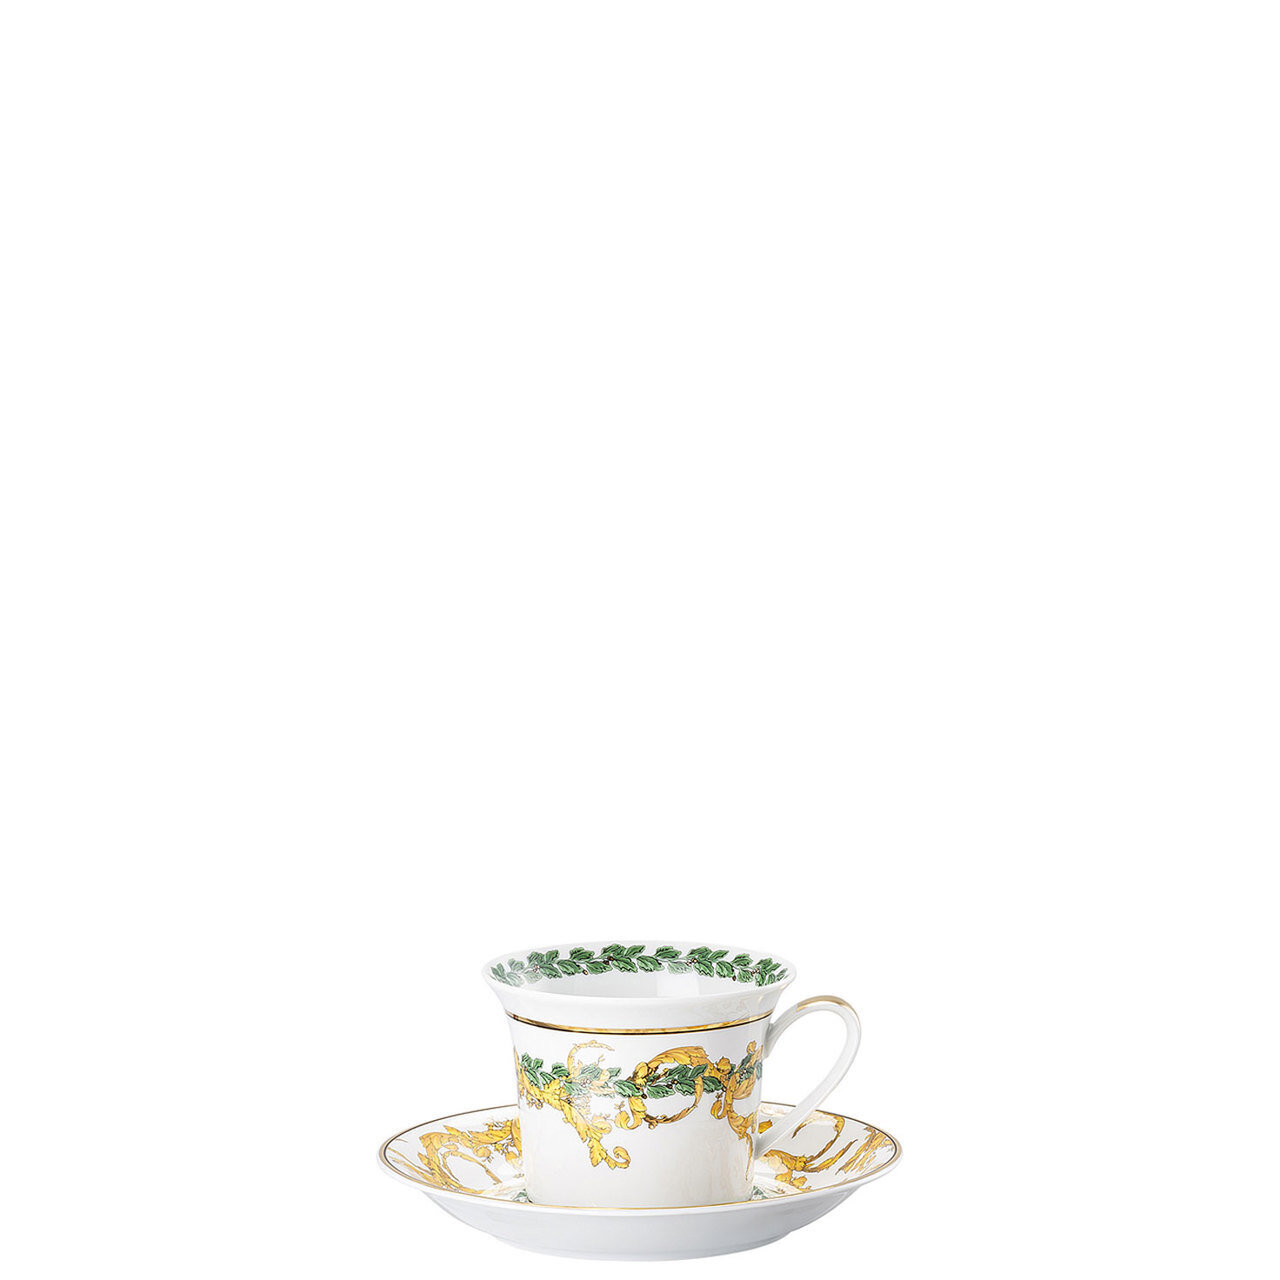 Versace Byzantine Dreams Cappuccino Cup and Saucer 6 Inch 8 oz.